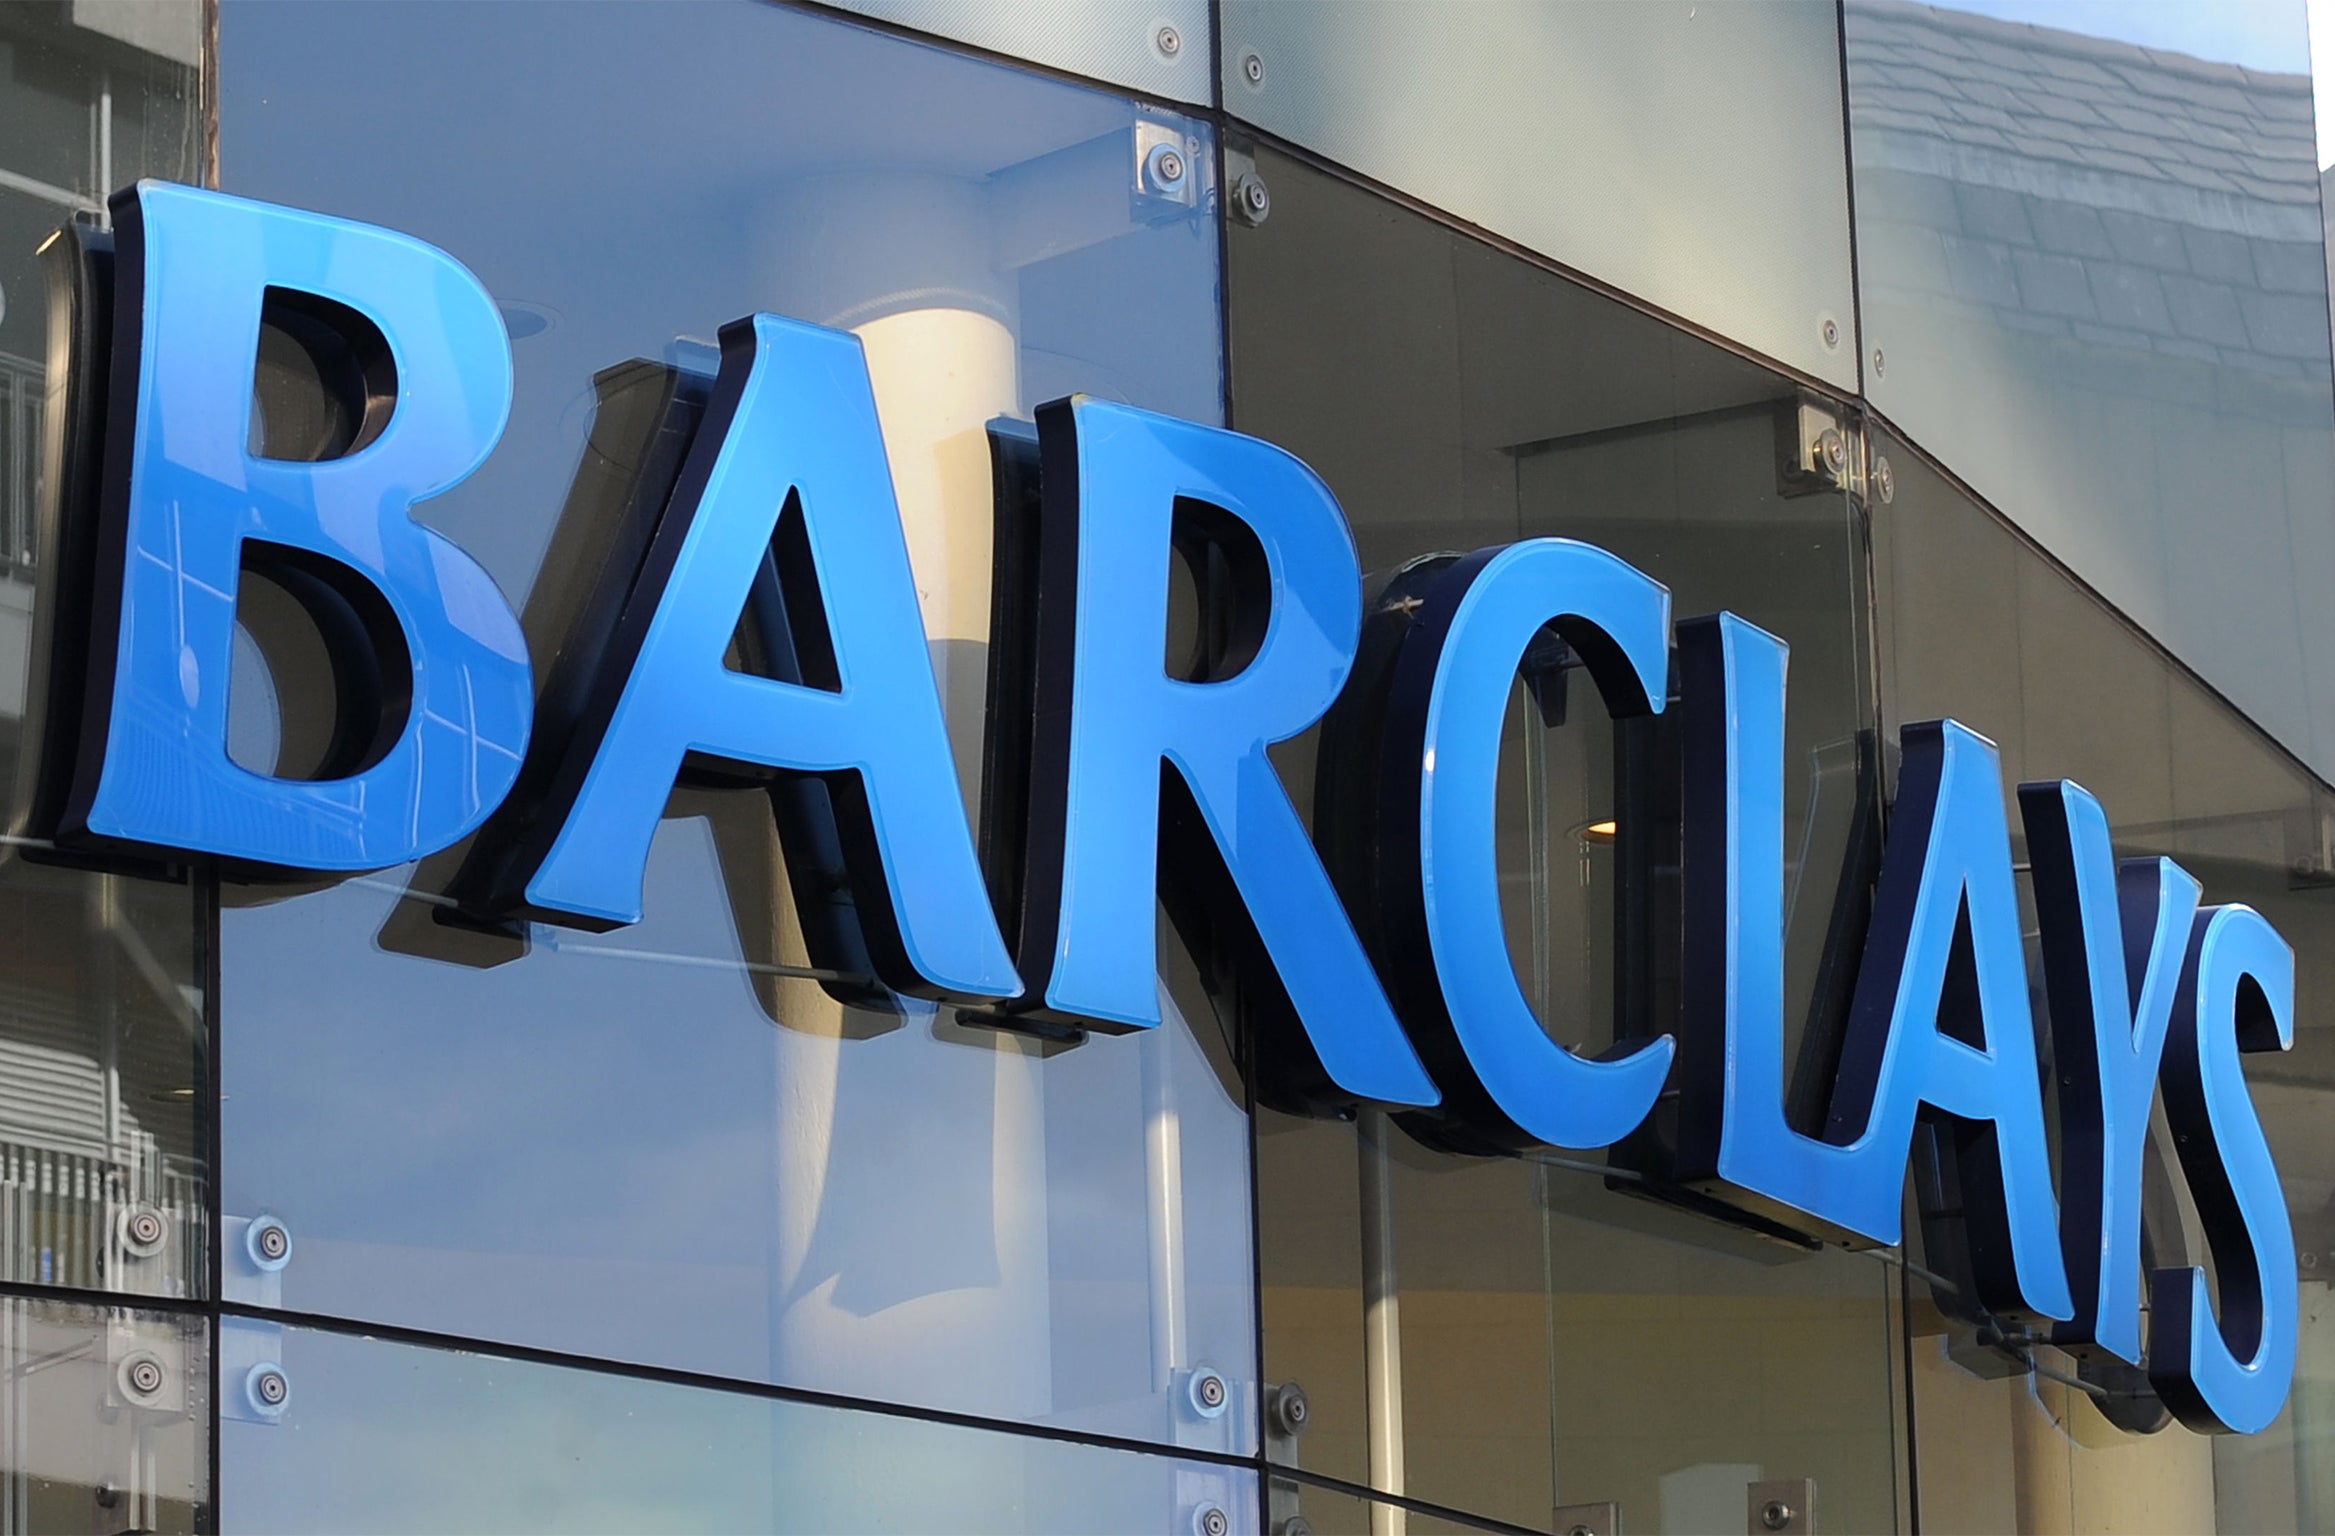 Barclays said it sold about one-fifth of its stake in Barclays Africa Group